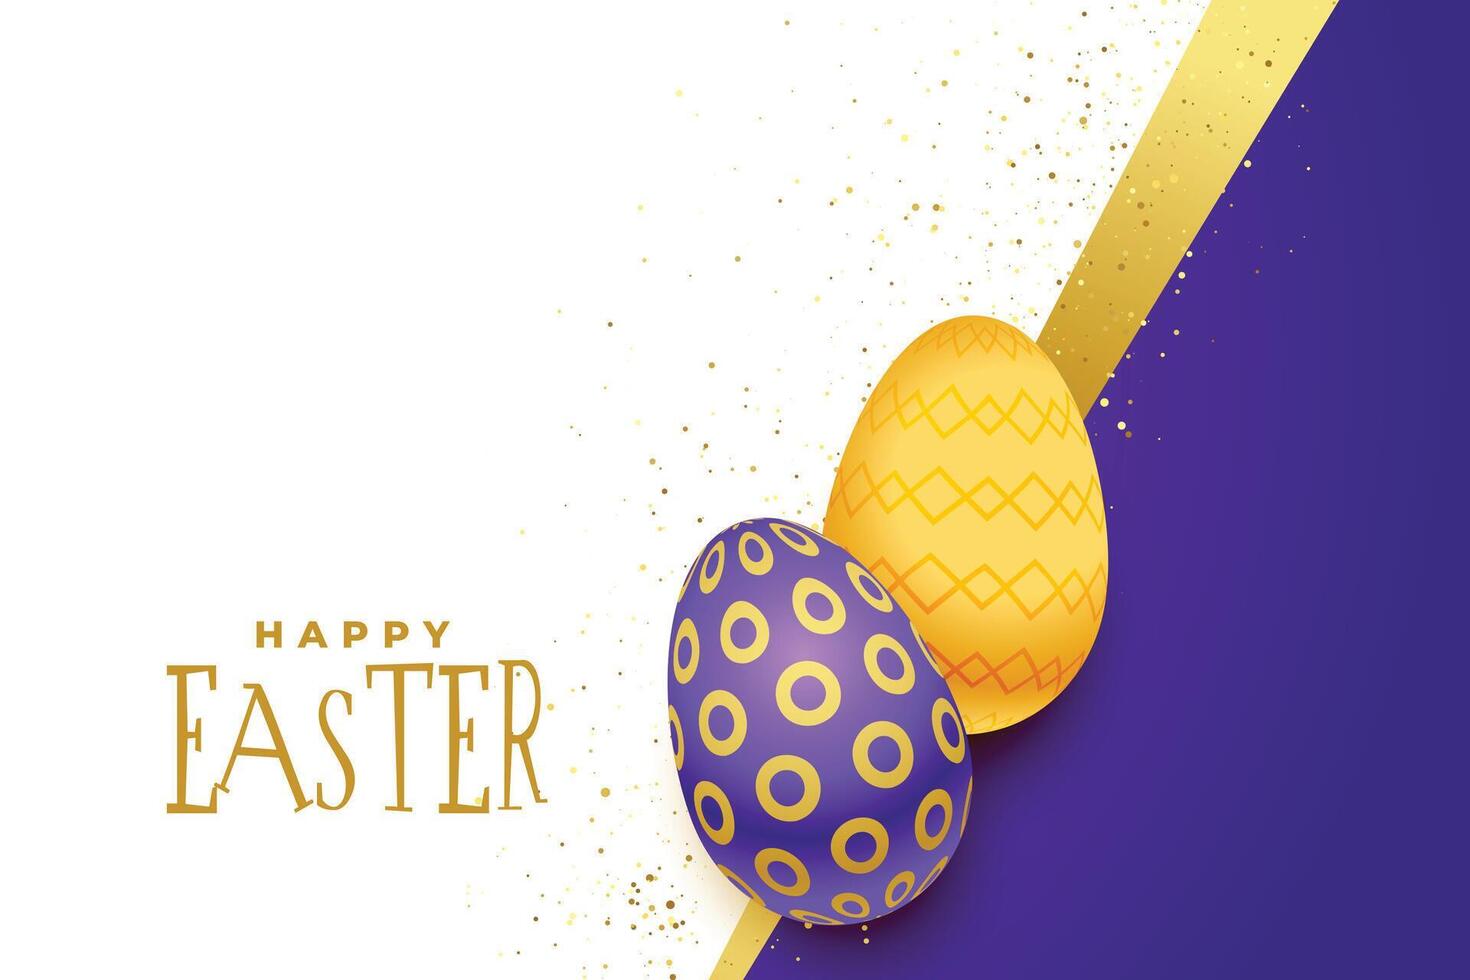 beautiful happy easter background with golden and purple eggs vector